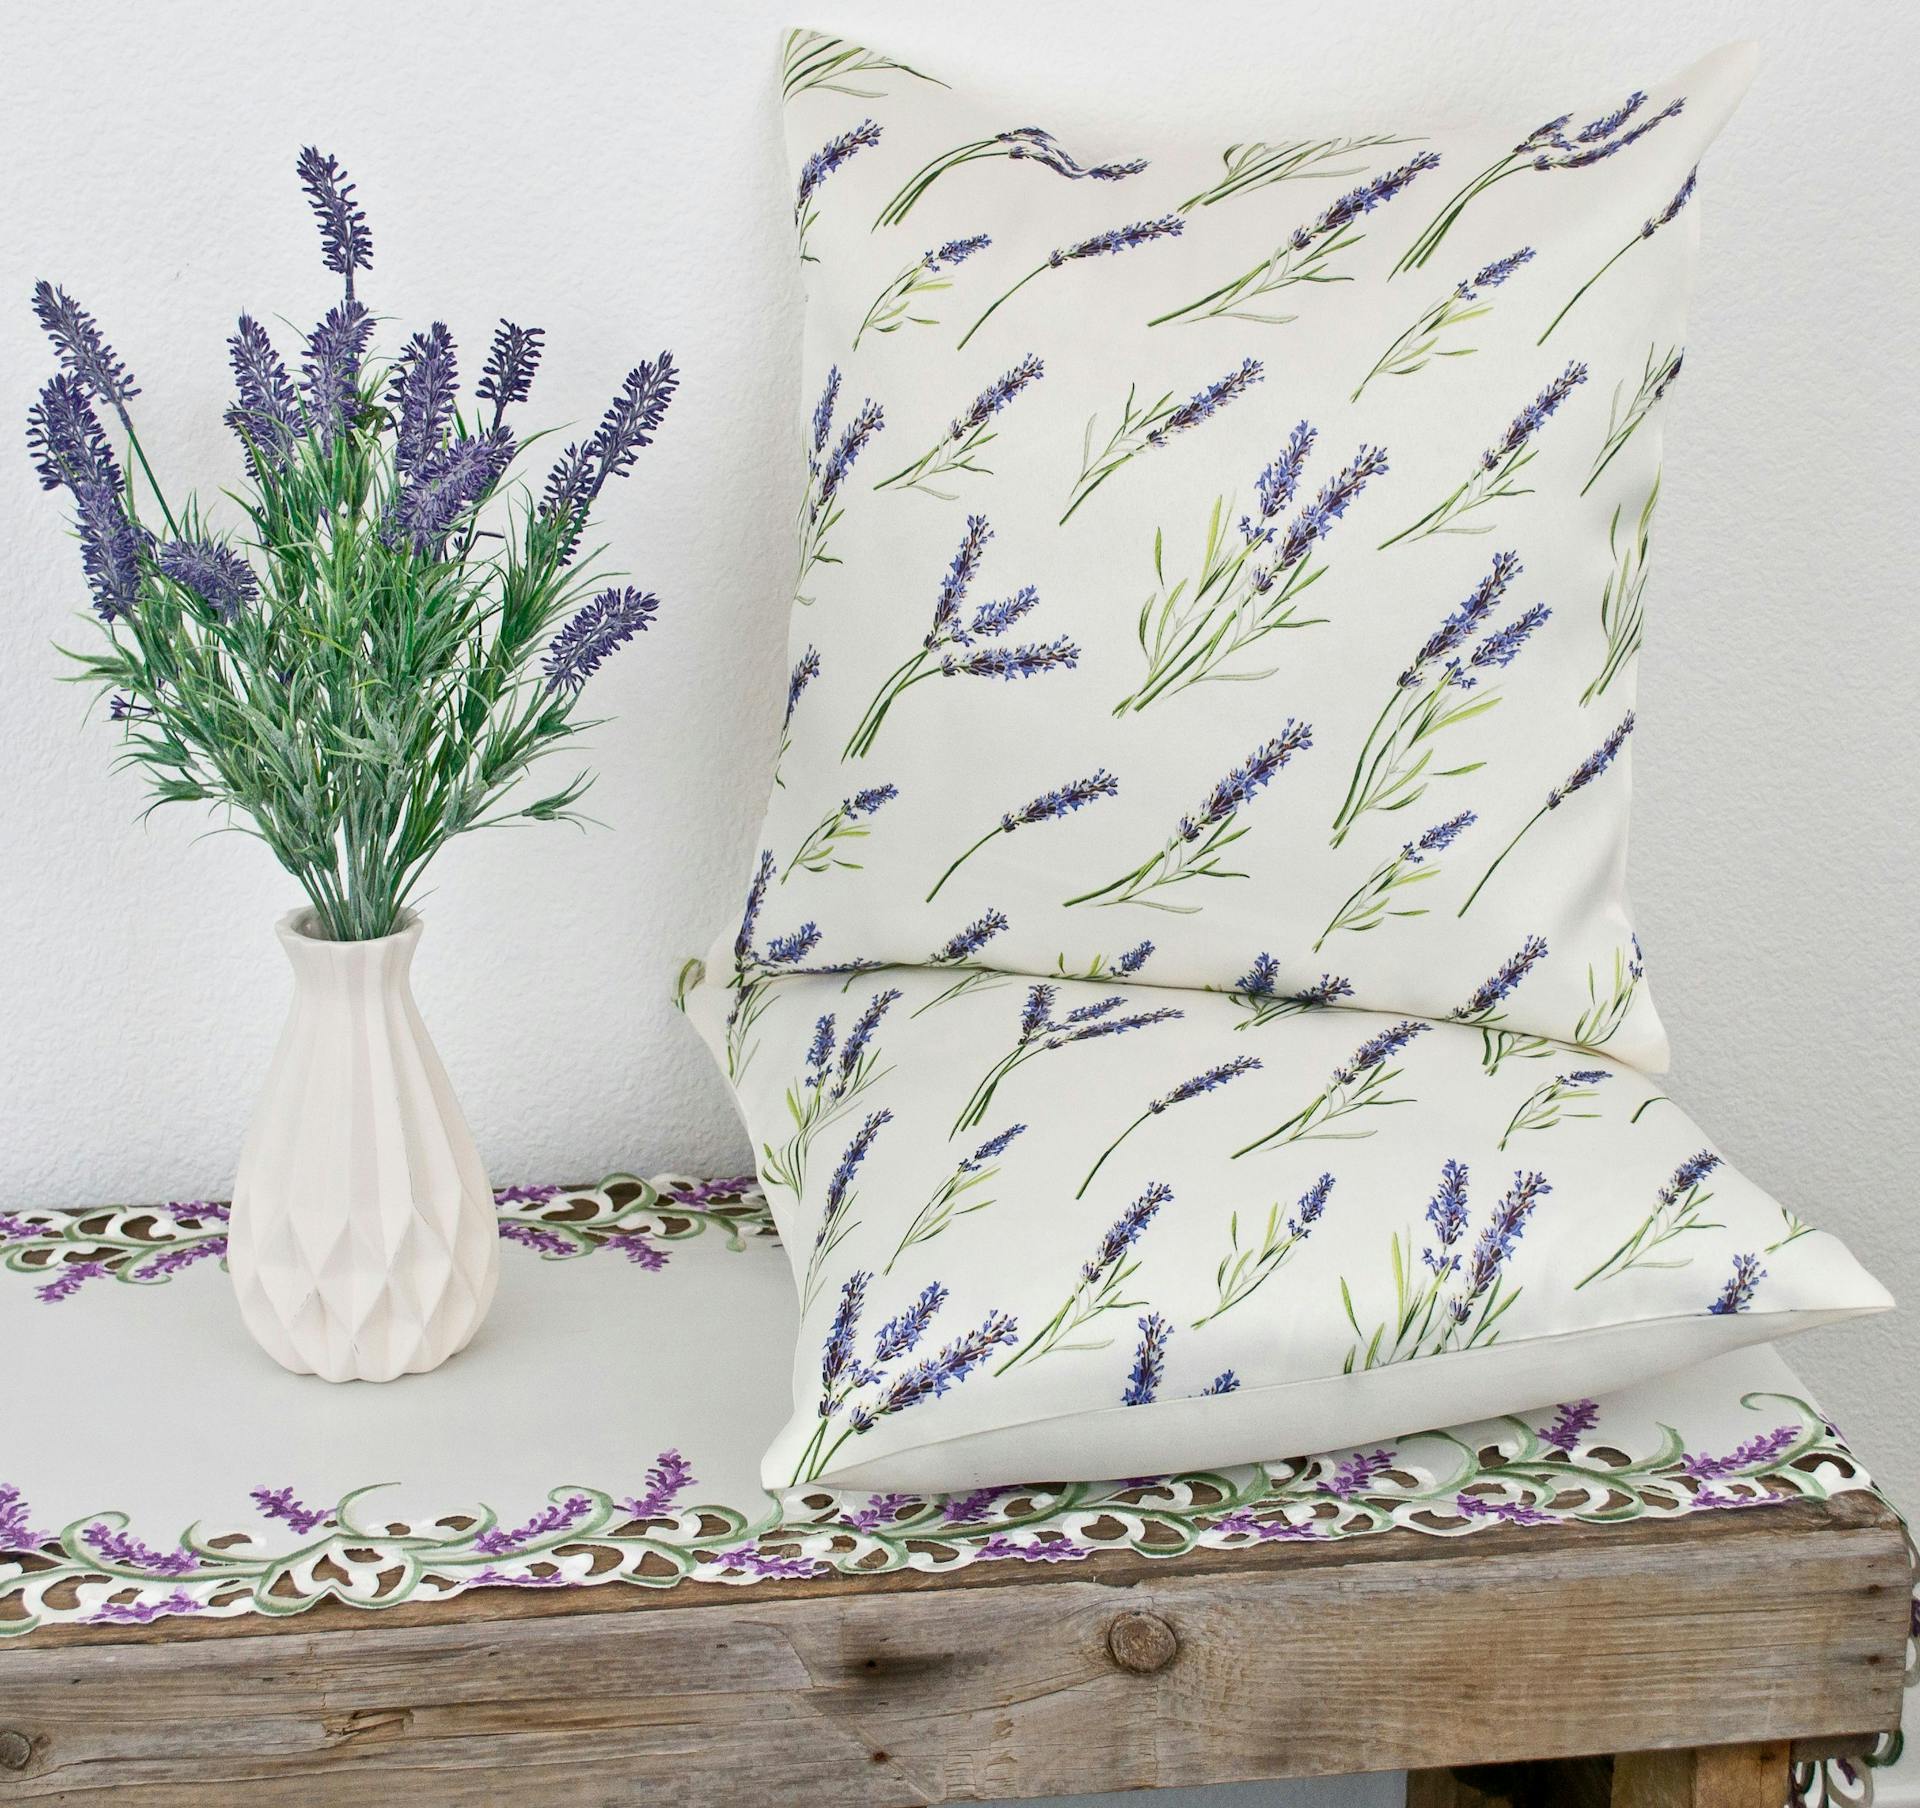 Elegant Lavender Flowers Cushion Case Pillow Cover with Zipper 2 Pack (18" x 18")